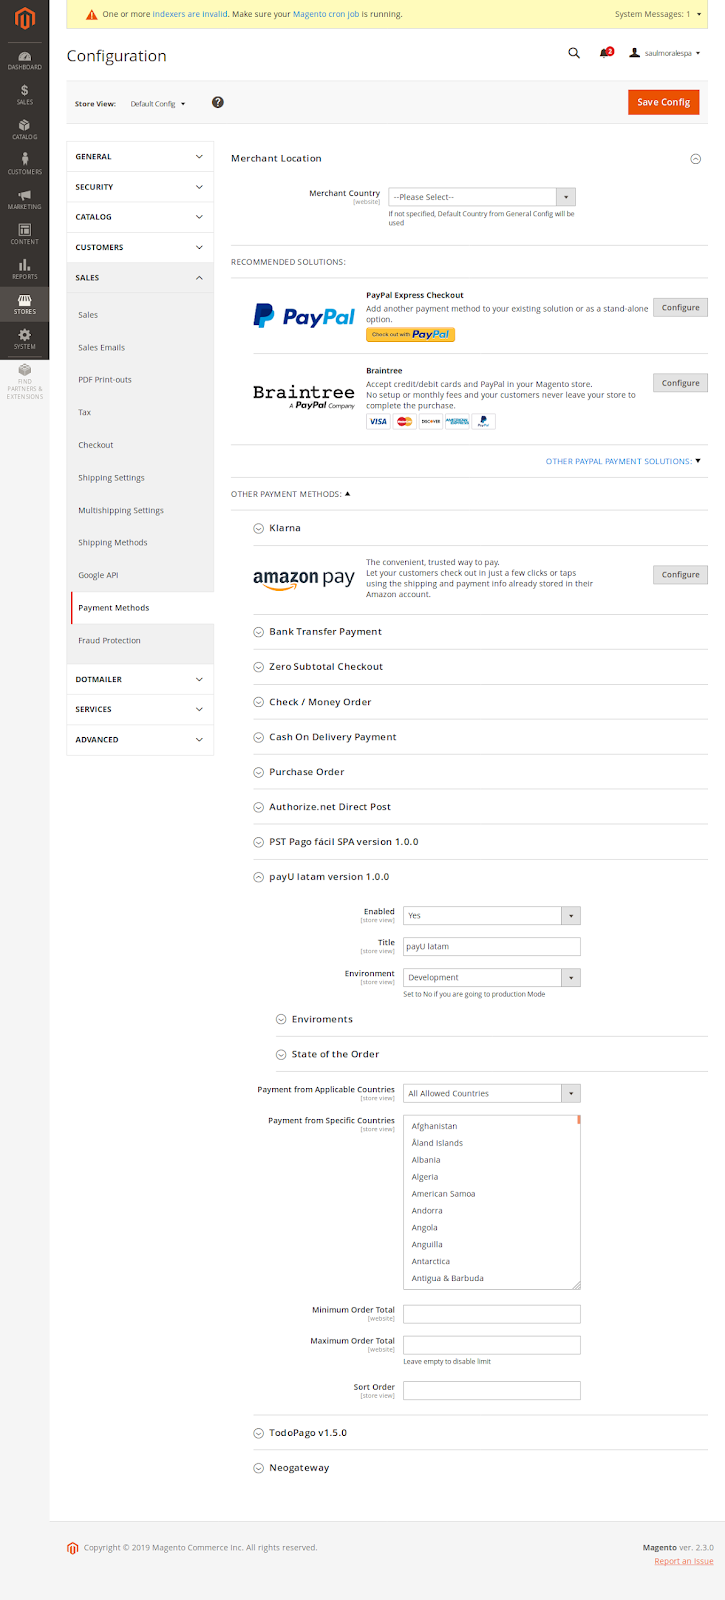 Enter the configuration menu of the payment method